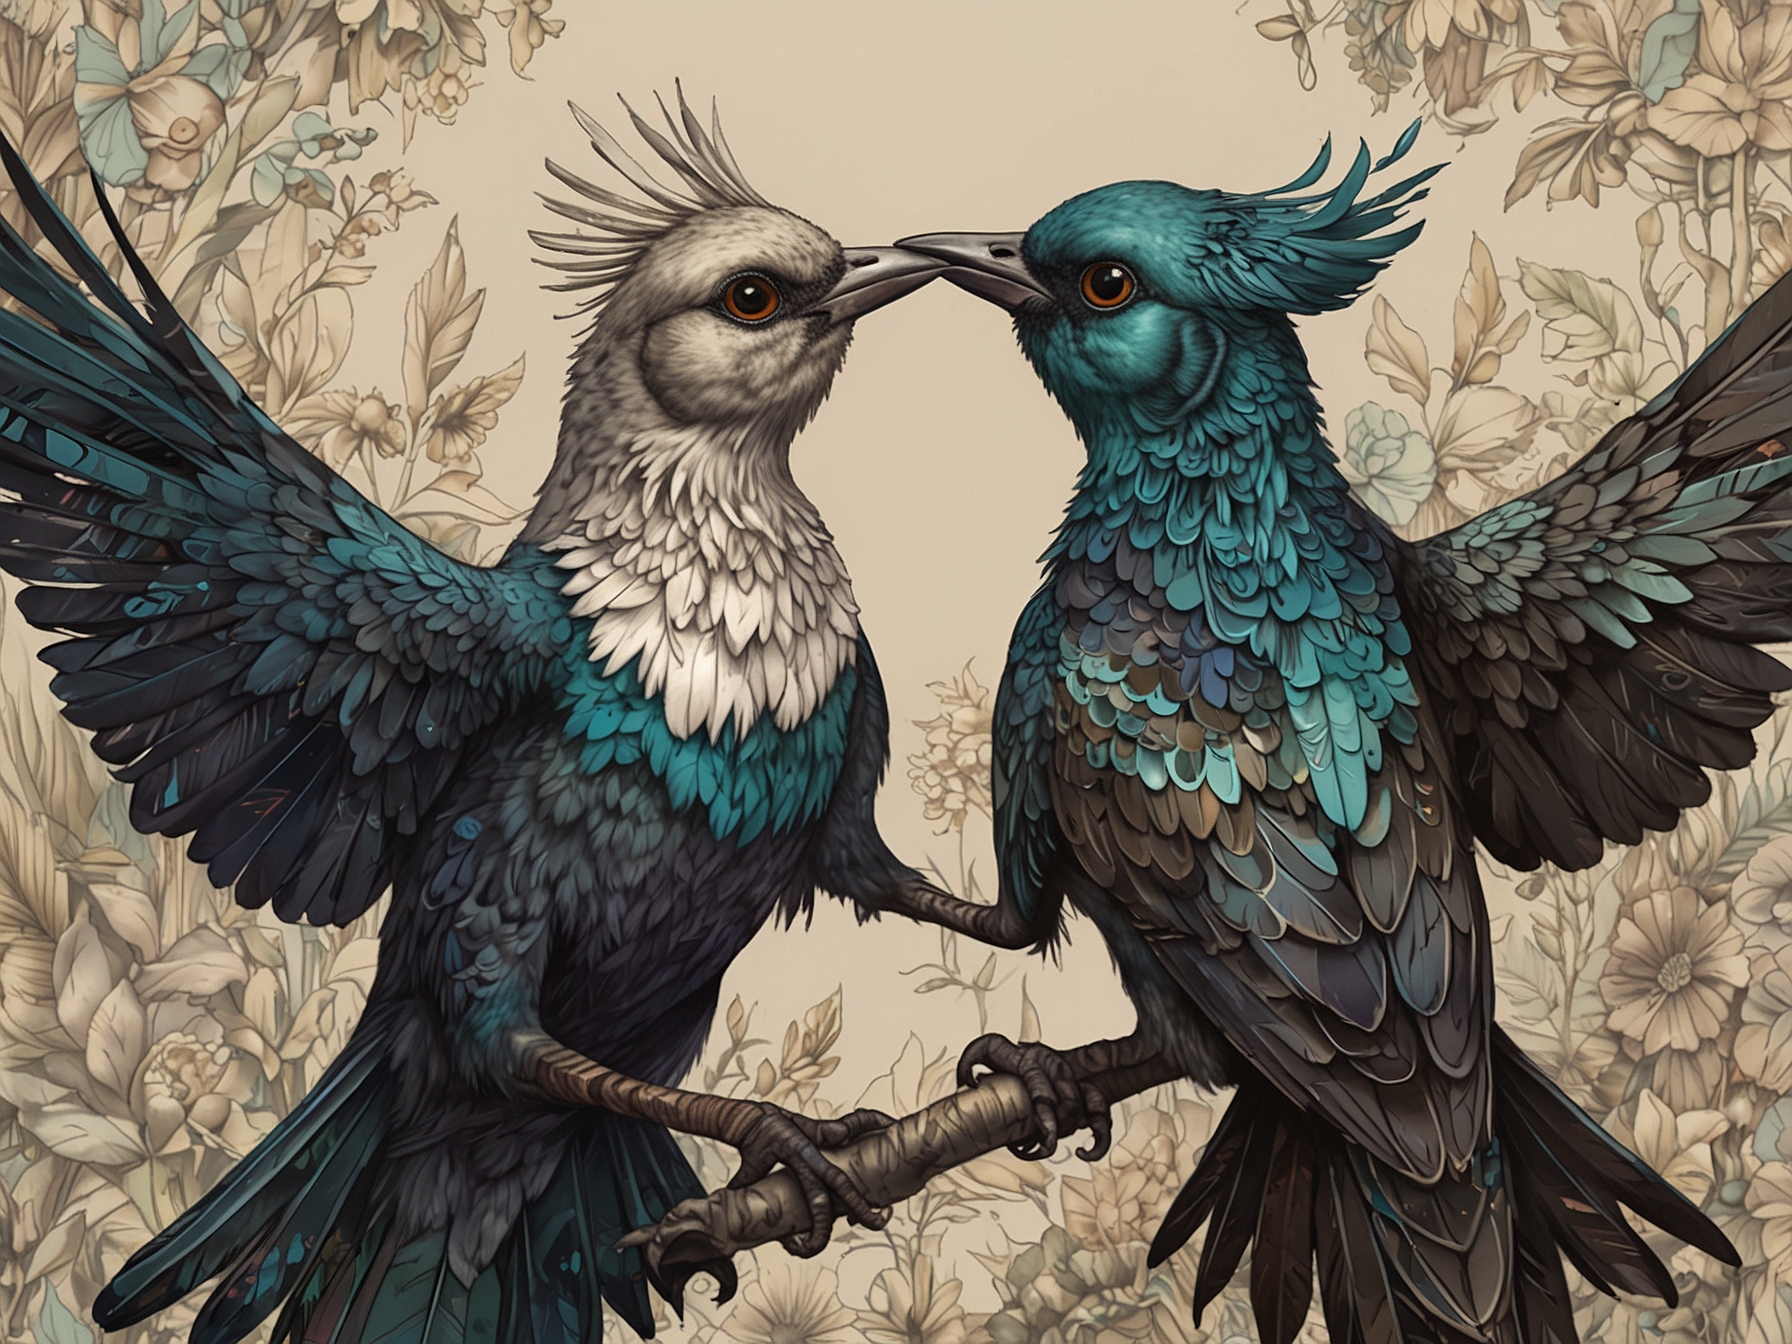 A stunning visual of various bird species engaging in elaborate courtship dances, showcasing their intricate rituals of communication and attraction as explored in 'Queer Planet'.